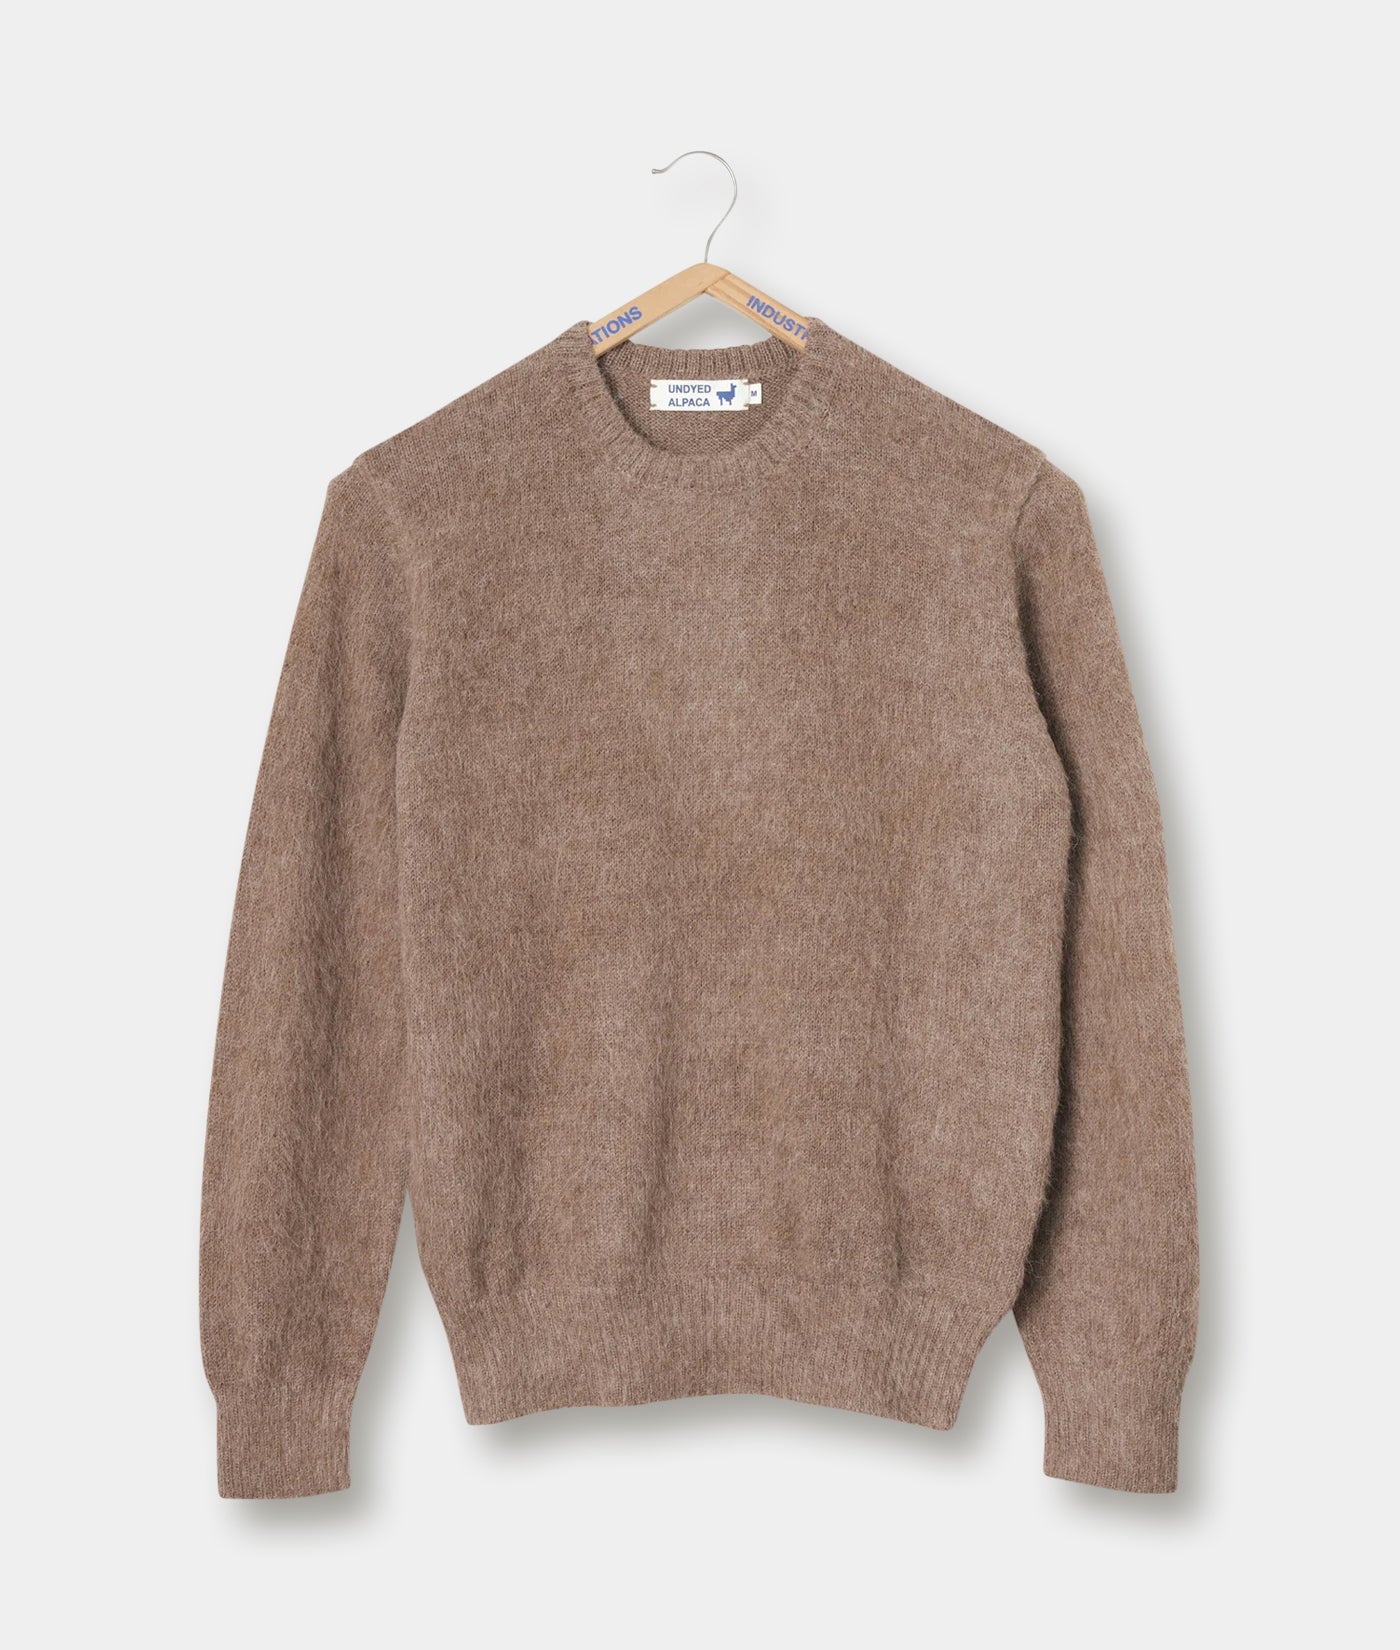 Alpaca Wool Crewneck Sweater | Industry of All Nations